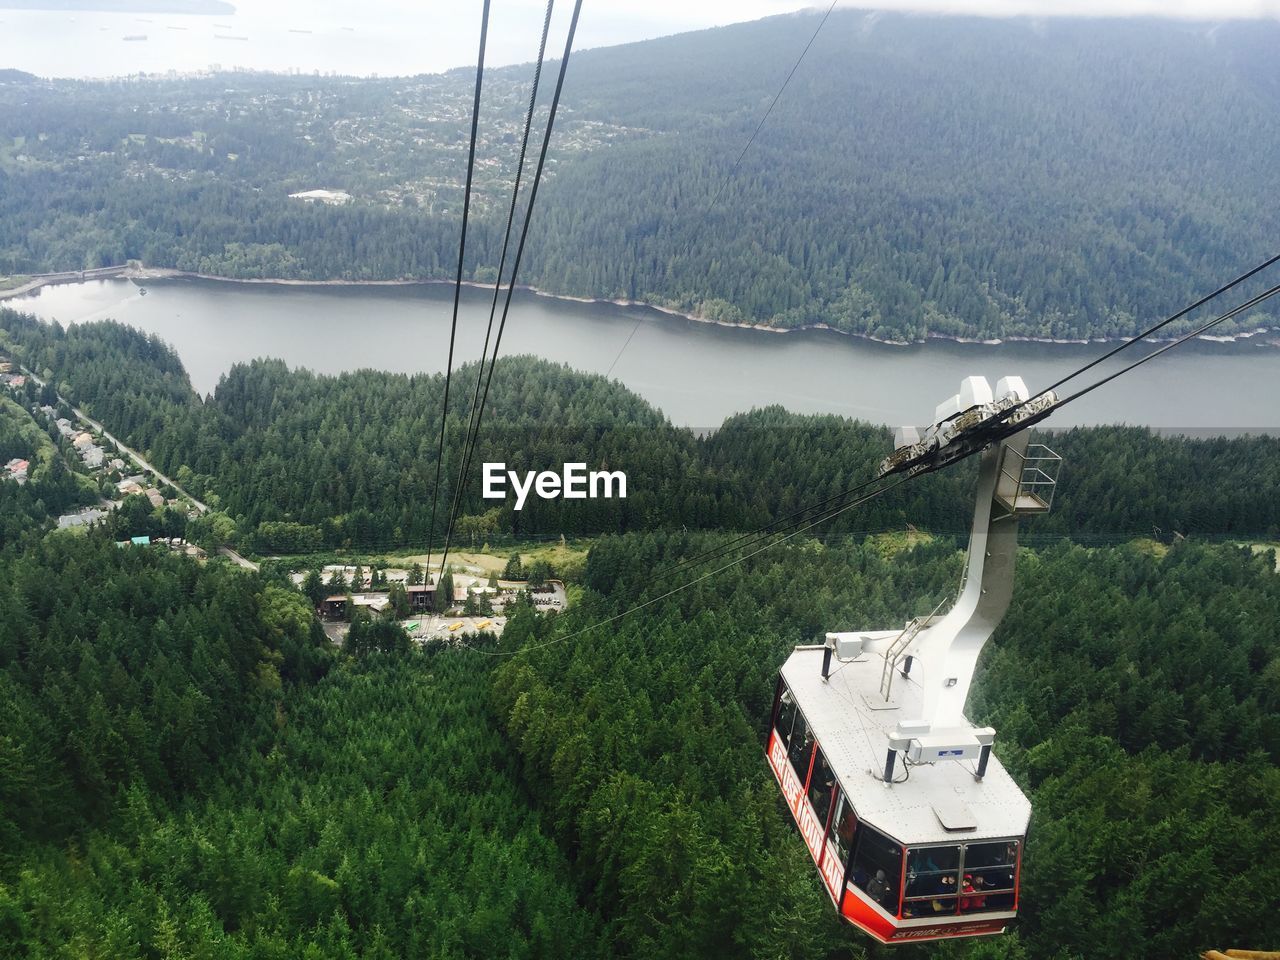 Ski lift over forest by river against mountains